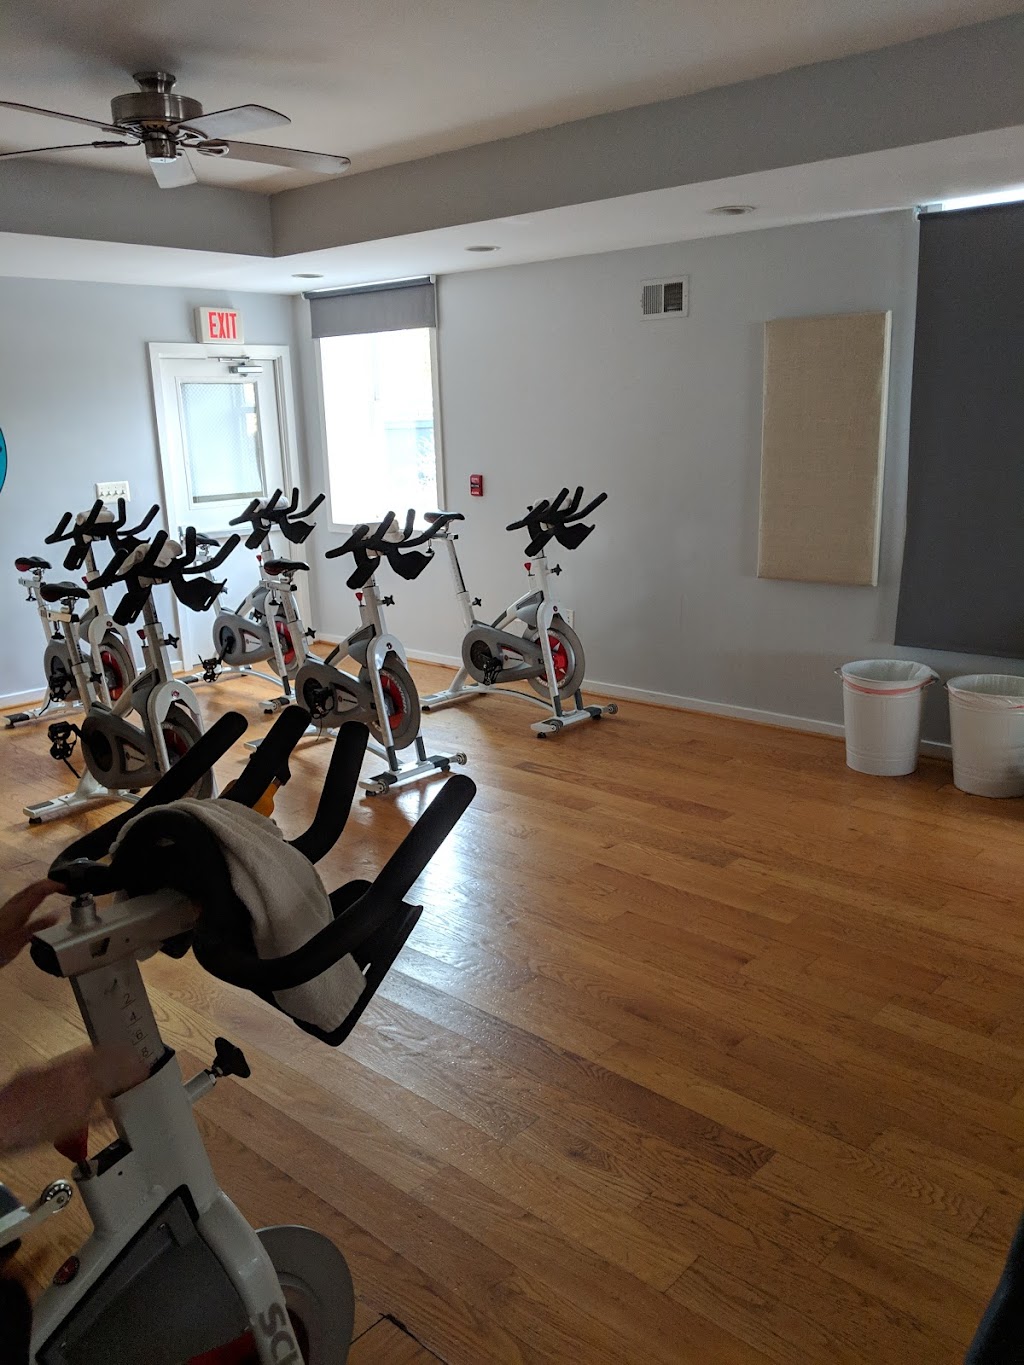 Chestnut Hill Cycle Fitness | 735 Bethlehem Pike, Flourtown, PA 19031 | Phone: (484) 369-9206